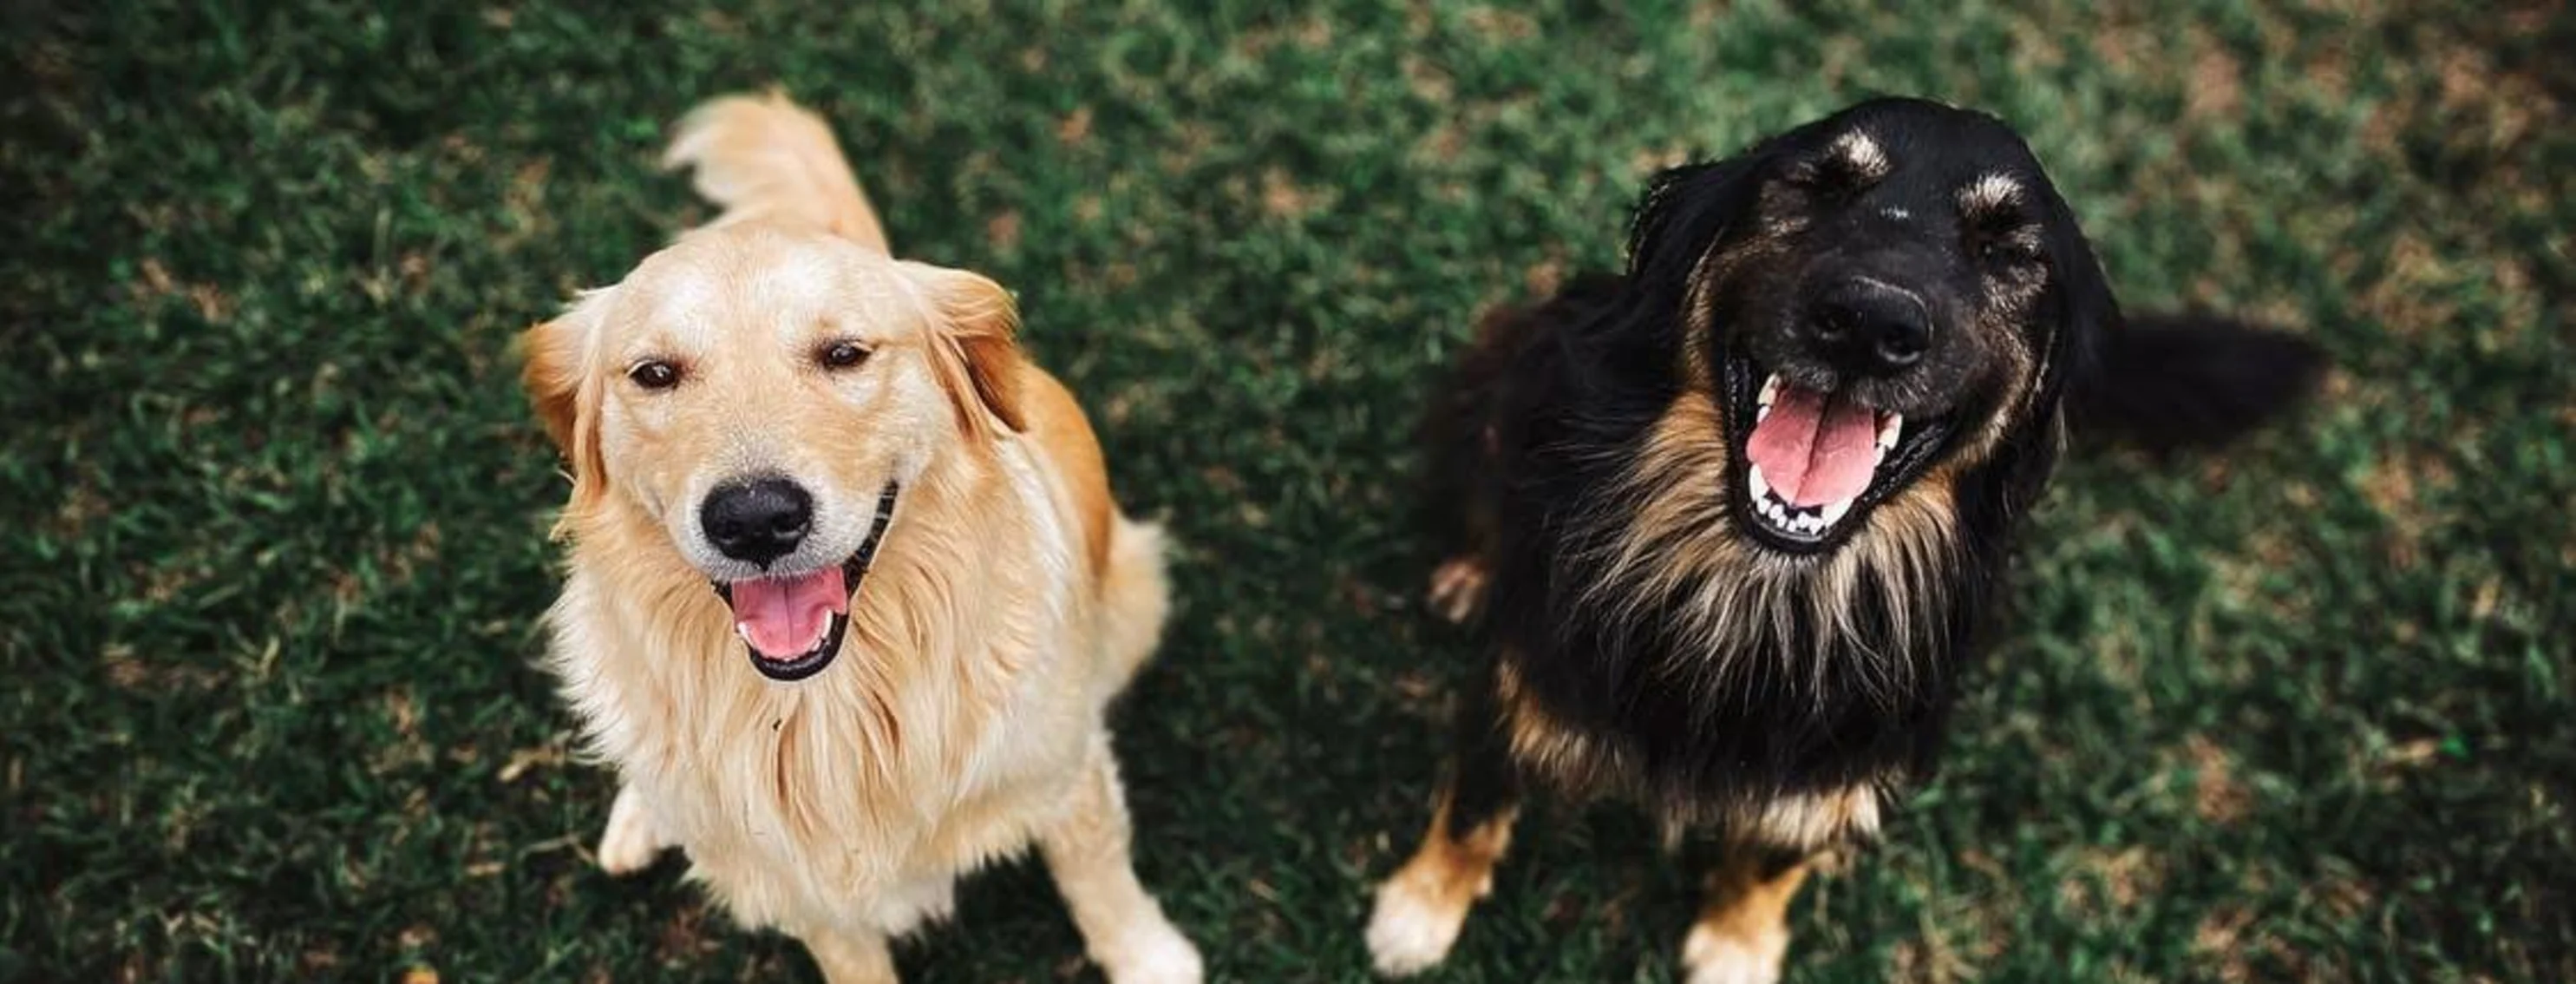 Two Dogs which one is a golden retriever and the other is shaggy black dog looking up at the camera smiling.